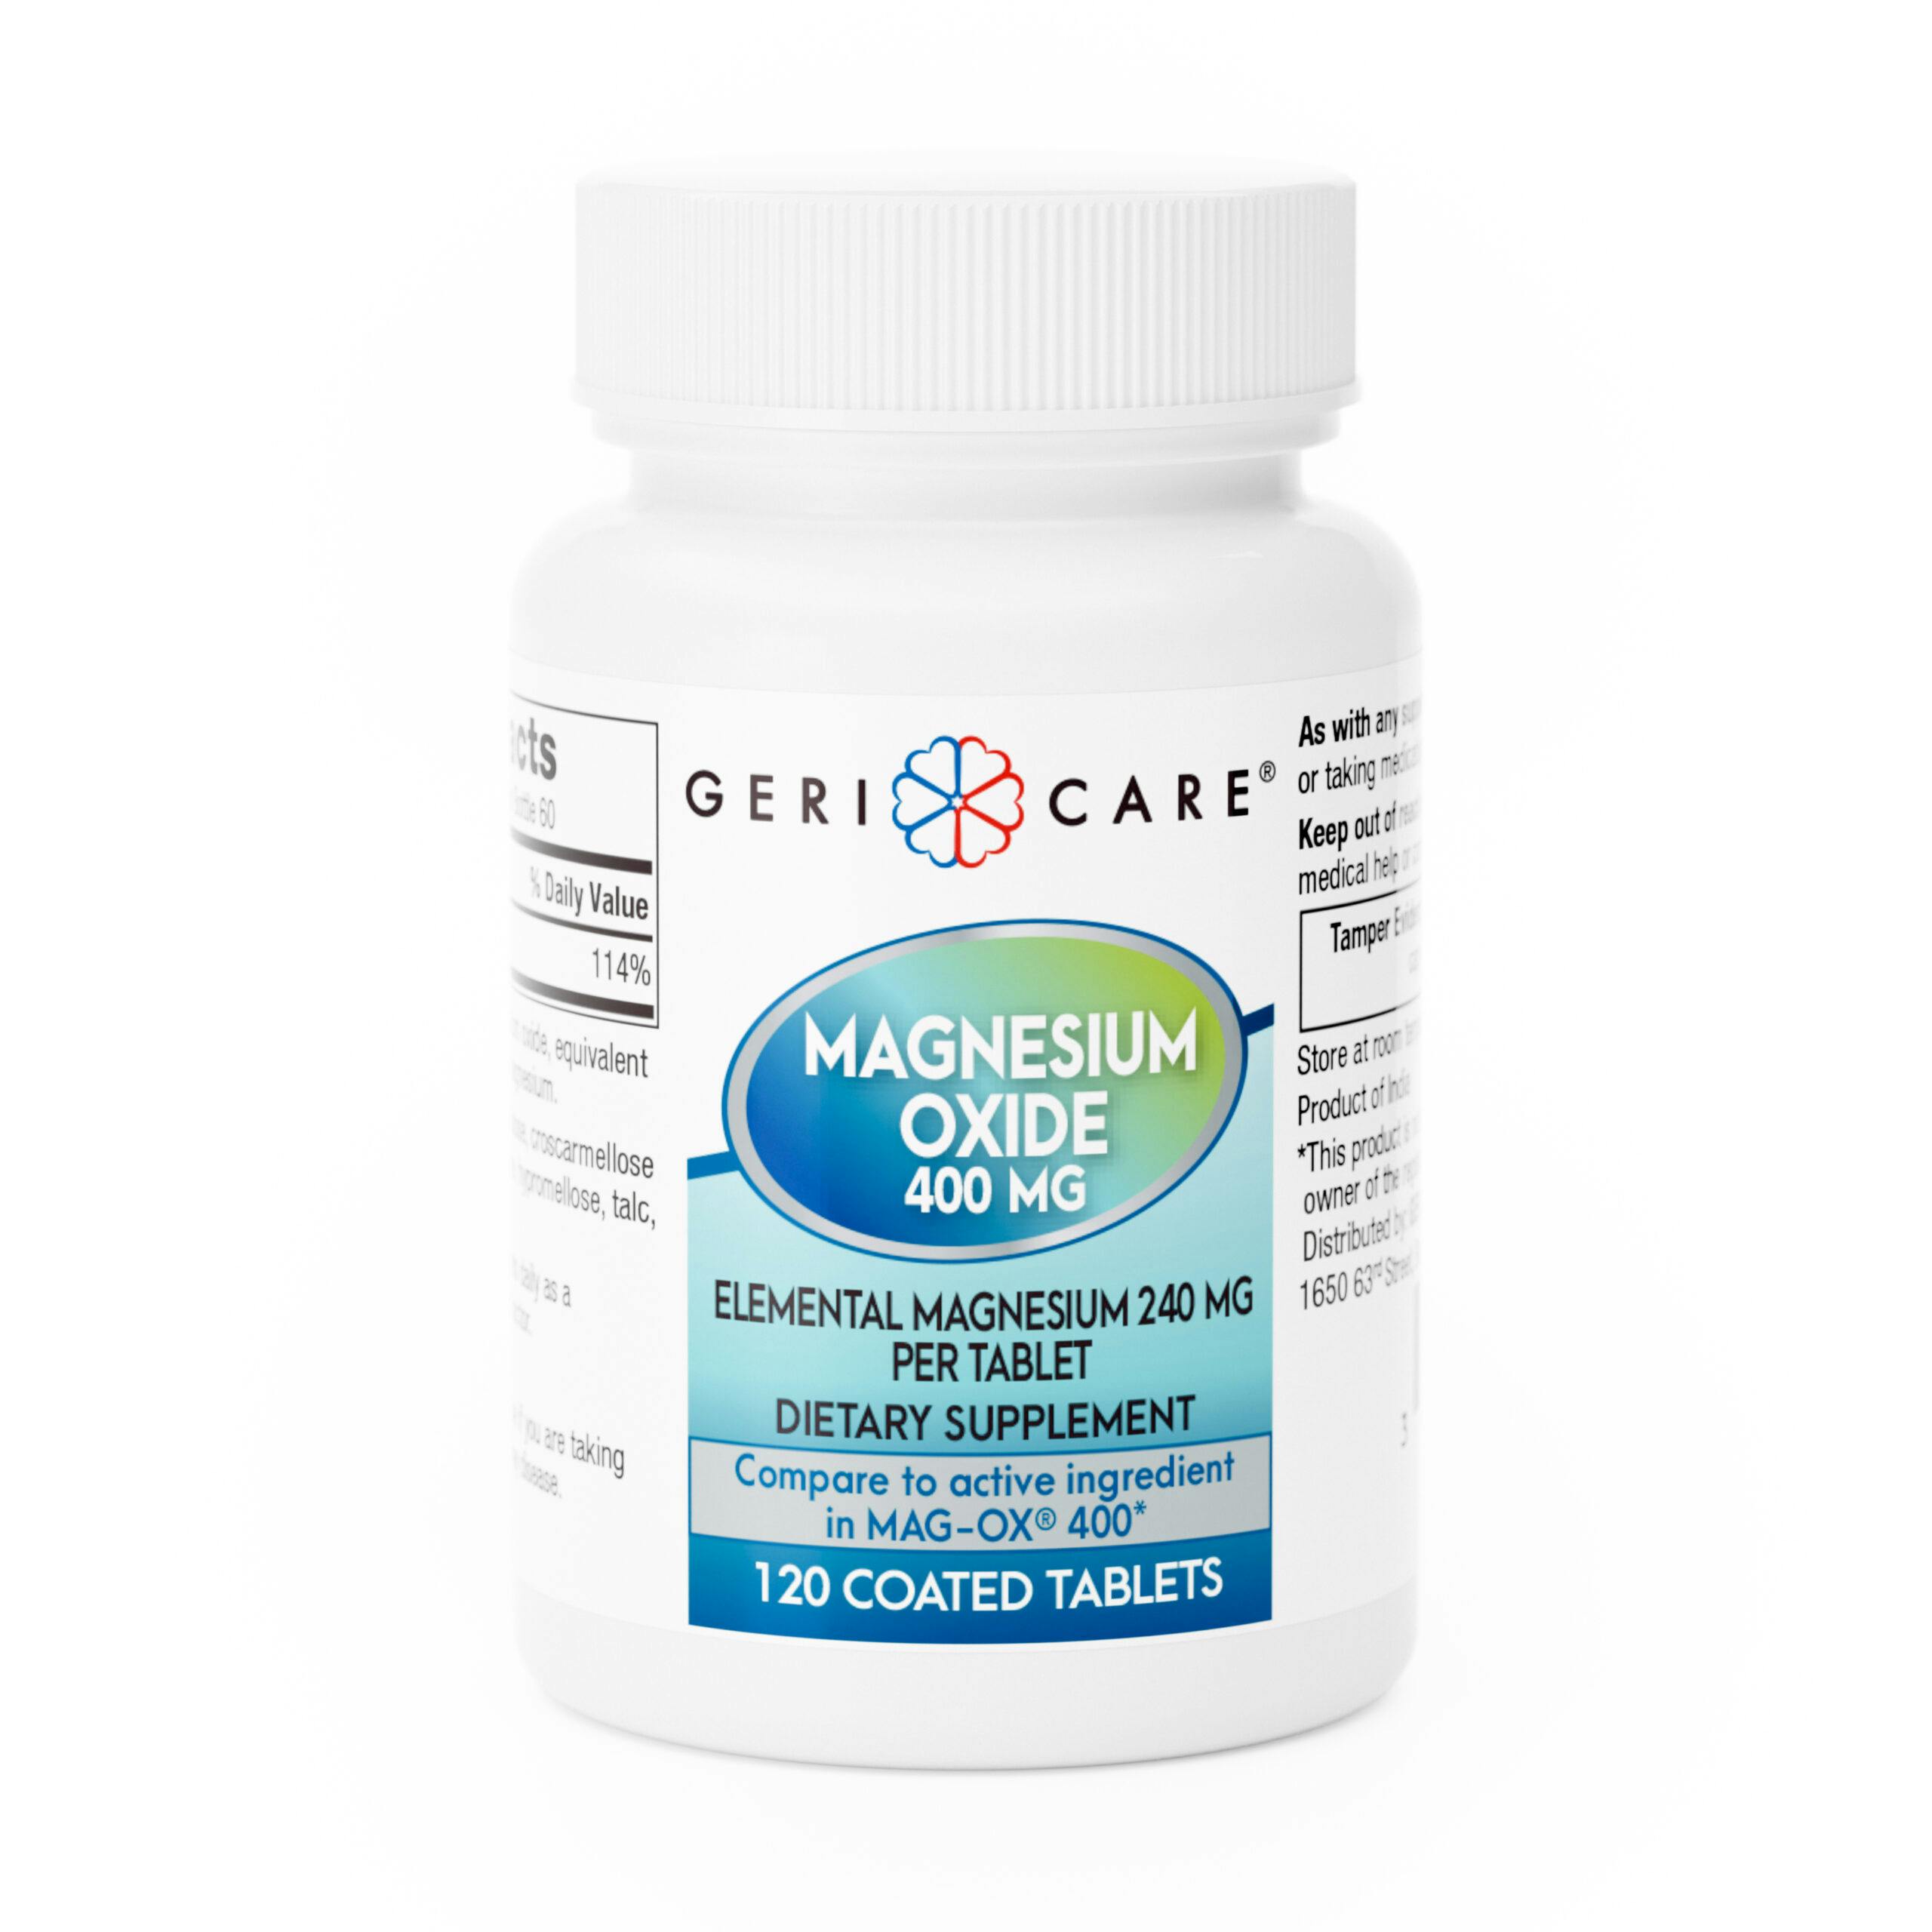 Geri-Care Magnesium Oxide Dietary Supplement, 400 mg, 120 Tablets, 634-12-GCP, 1 Bottle